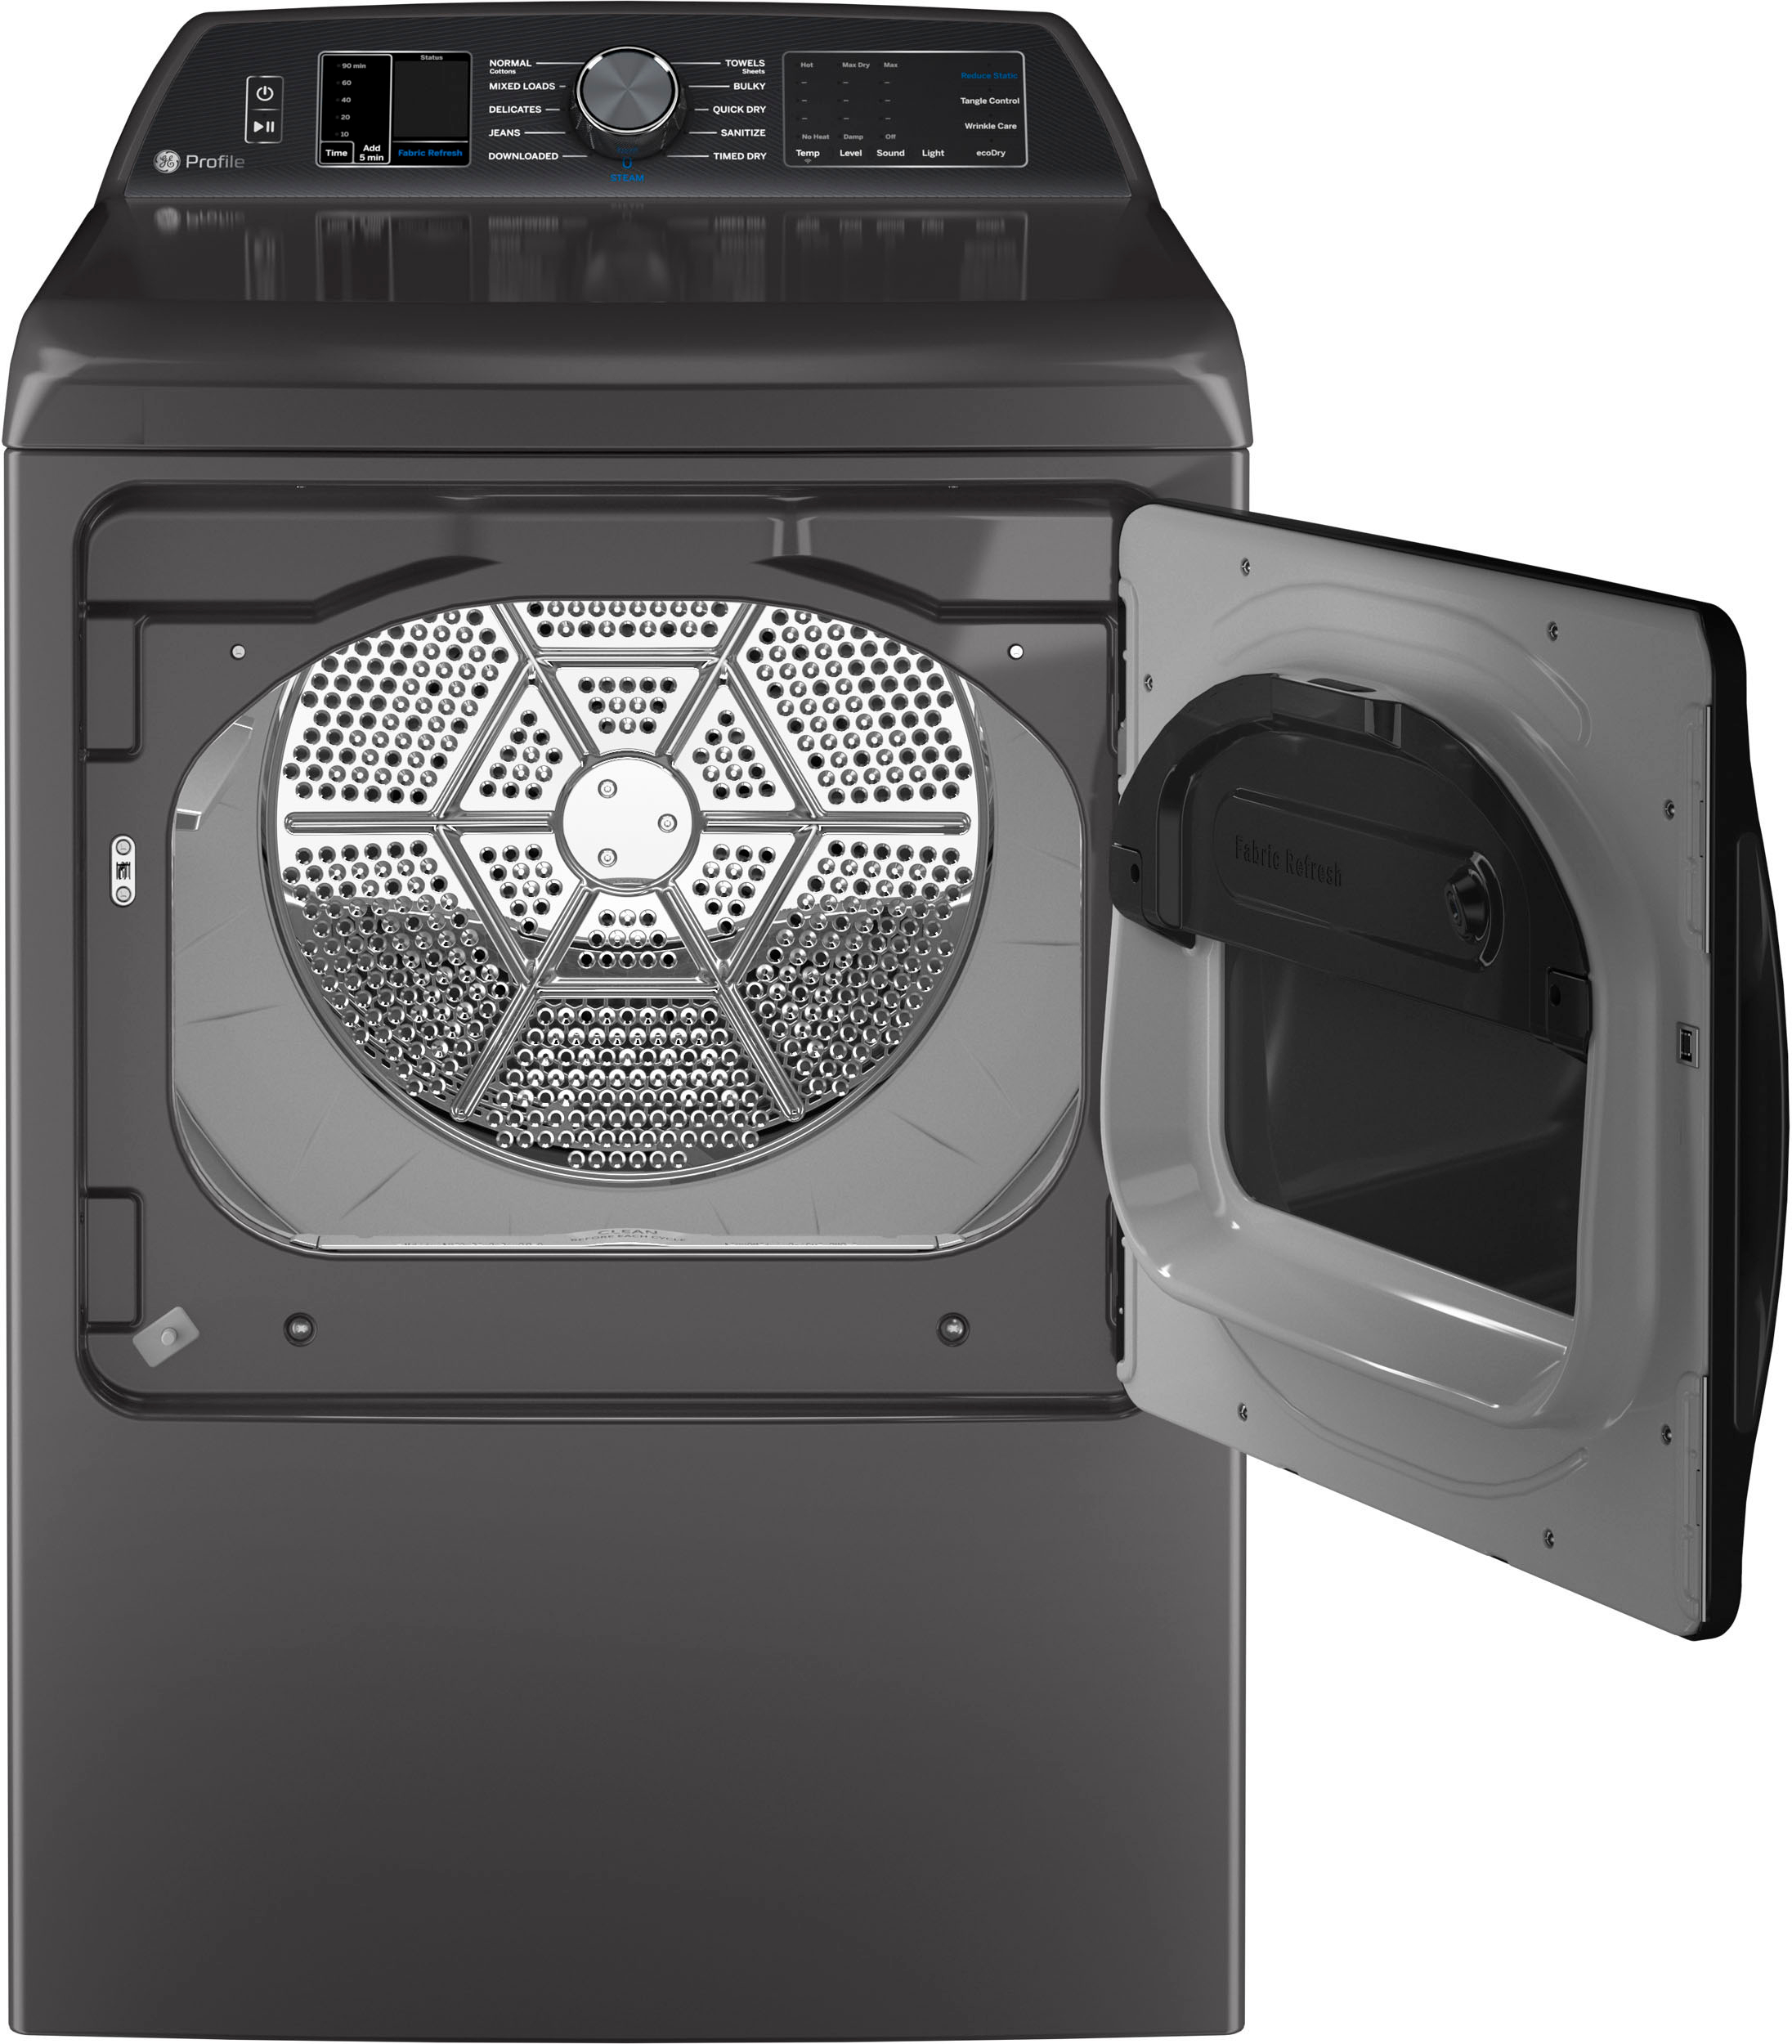 Angle View: GE Profile - 7.3 cu. ft. Smart Gas Dryer with Fabric Refresh and Sanitize Cycle - Diamond gray